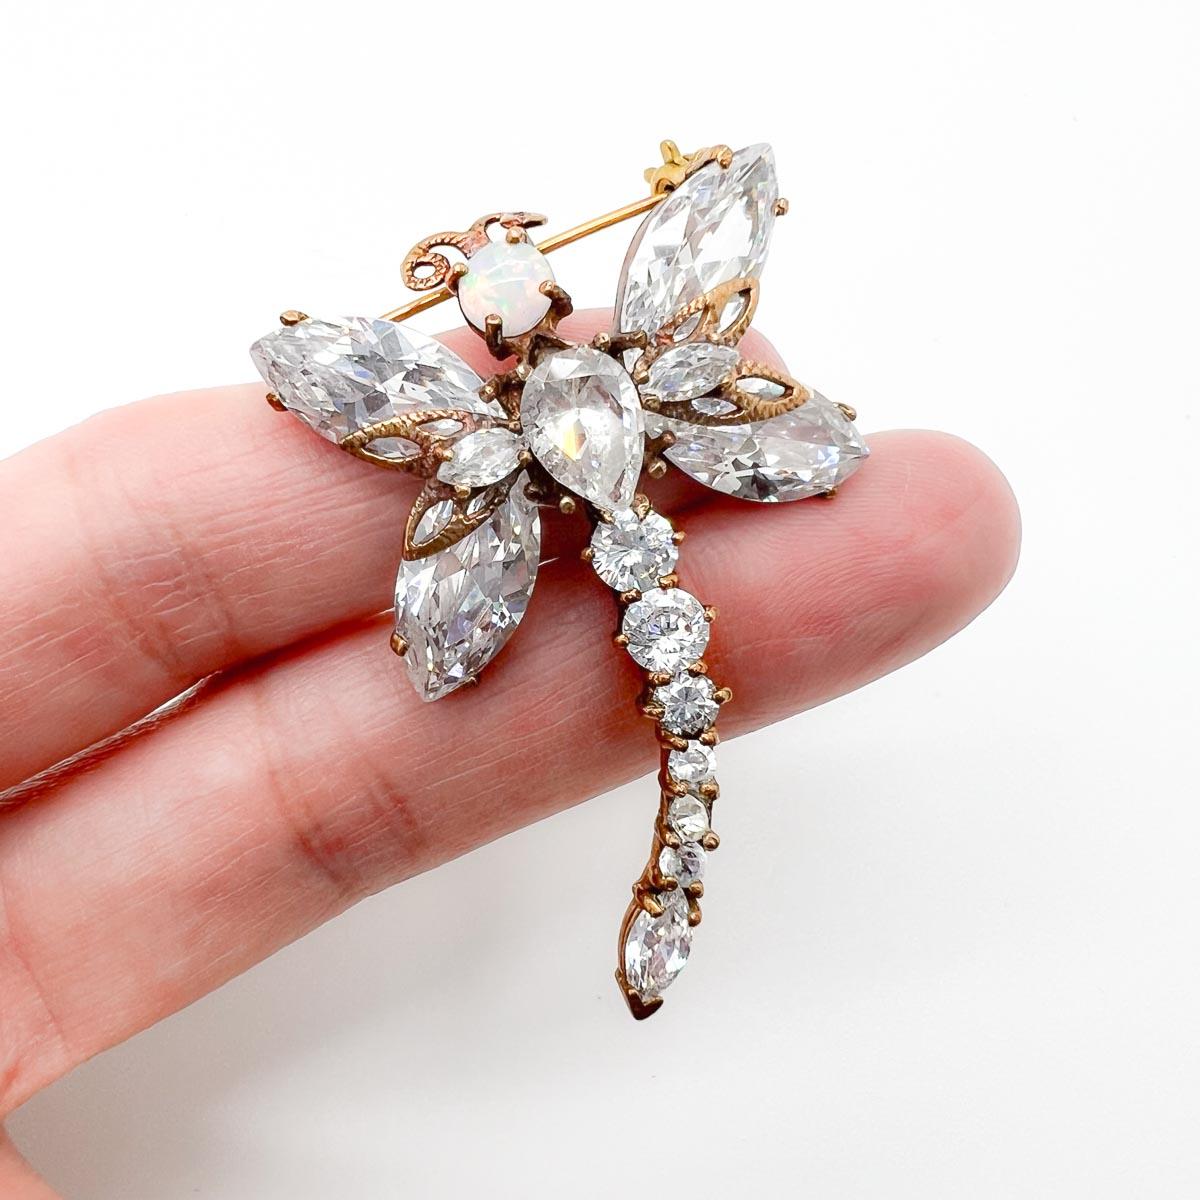 A Vintage Opal Crystal Dragonfly Brooch. Set with delightful crystals in fancy cut shapes and finished with a fiery opal for the head. Said to symbolise change and transformation this would make a beautiful gift or self gift if you are ringing the